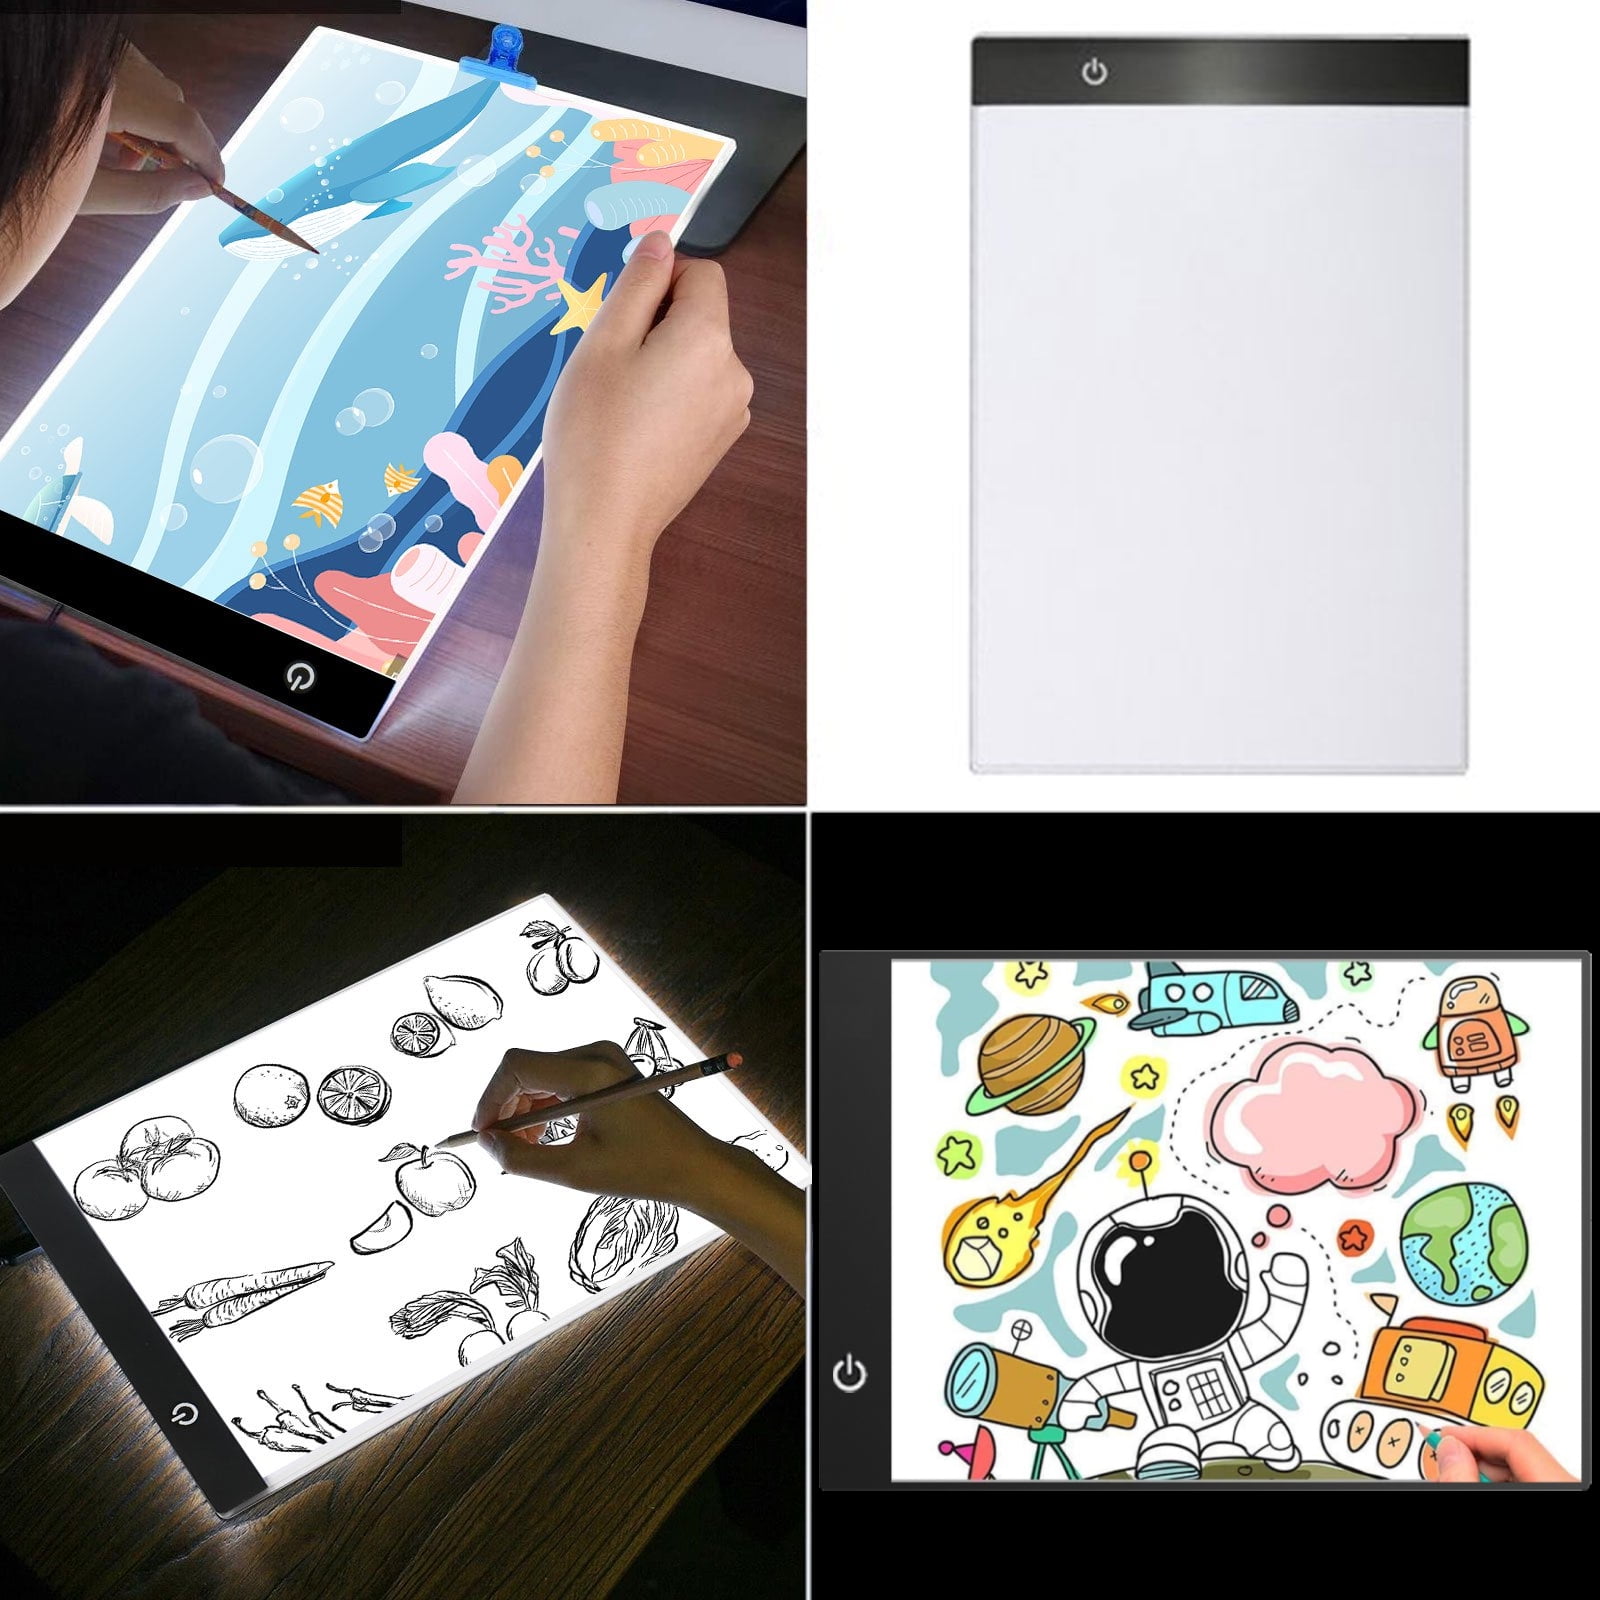 A4 LED Tracing Light Box Slim Portable LED Light Pad Tracer, TSV USB  Powered Drawing Copy Board Tattoo Tracing LED Light Table for Artists  Drawing, Animation, Sketching, Stenciling, X-ray Viewing 